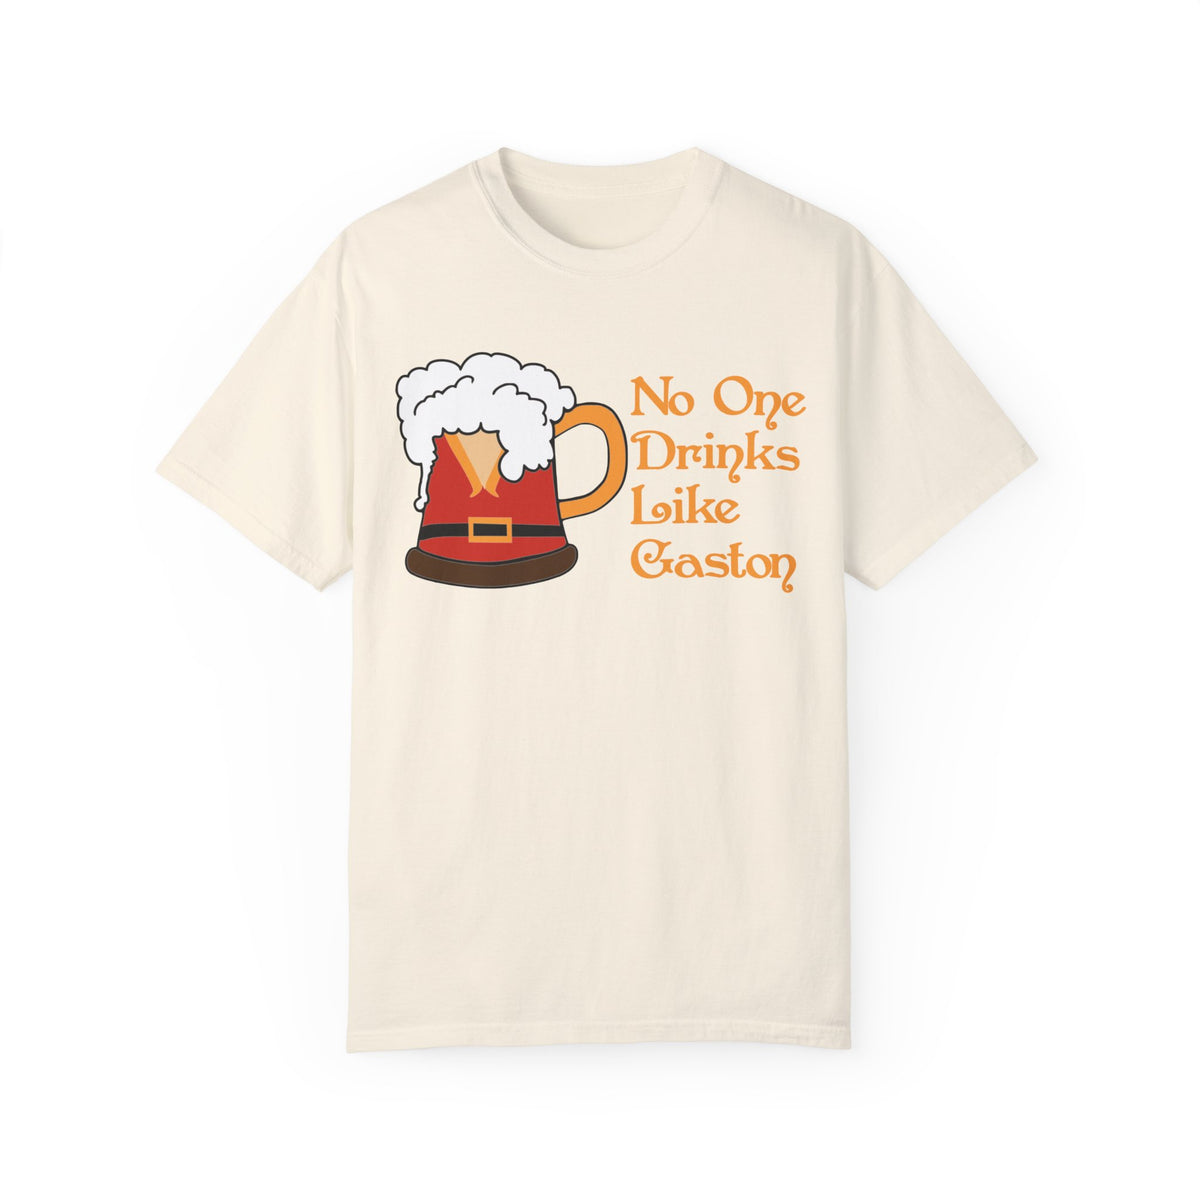 No One Drinks Like Gaston Comfort Colors Unisex Garment-Dyed T-shirt